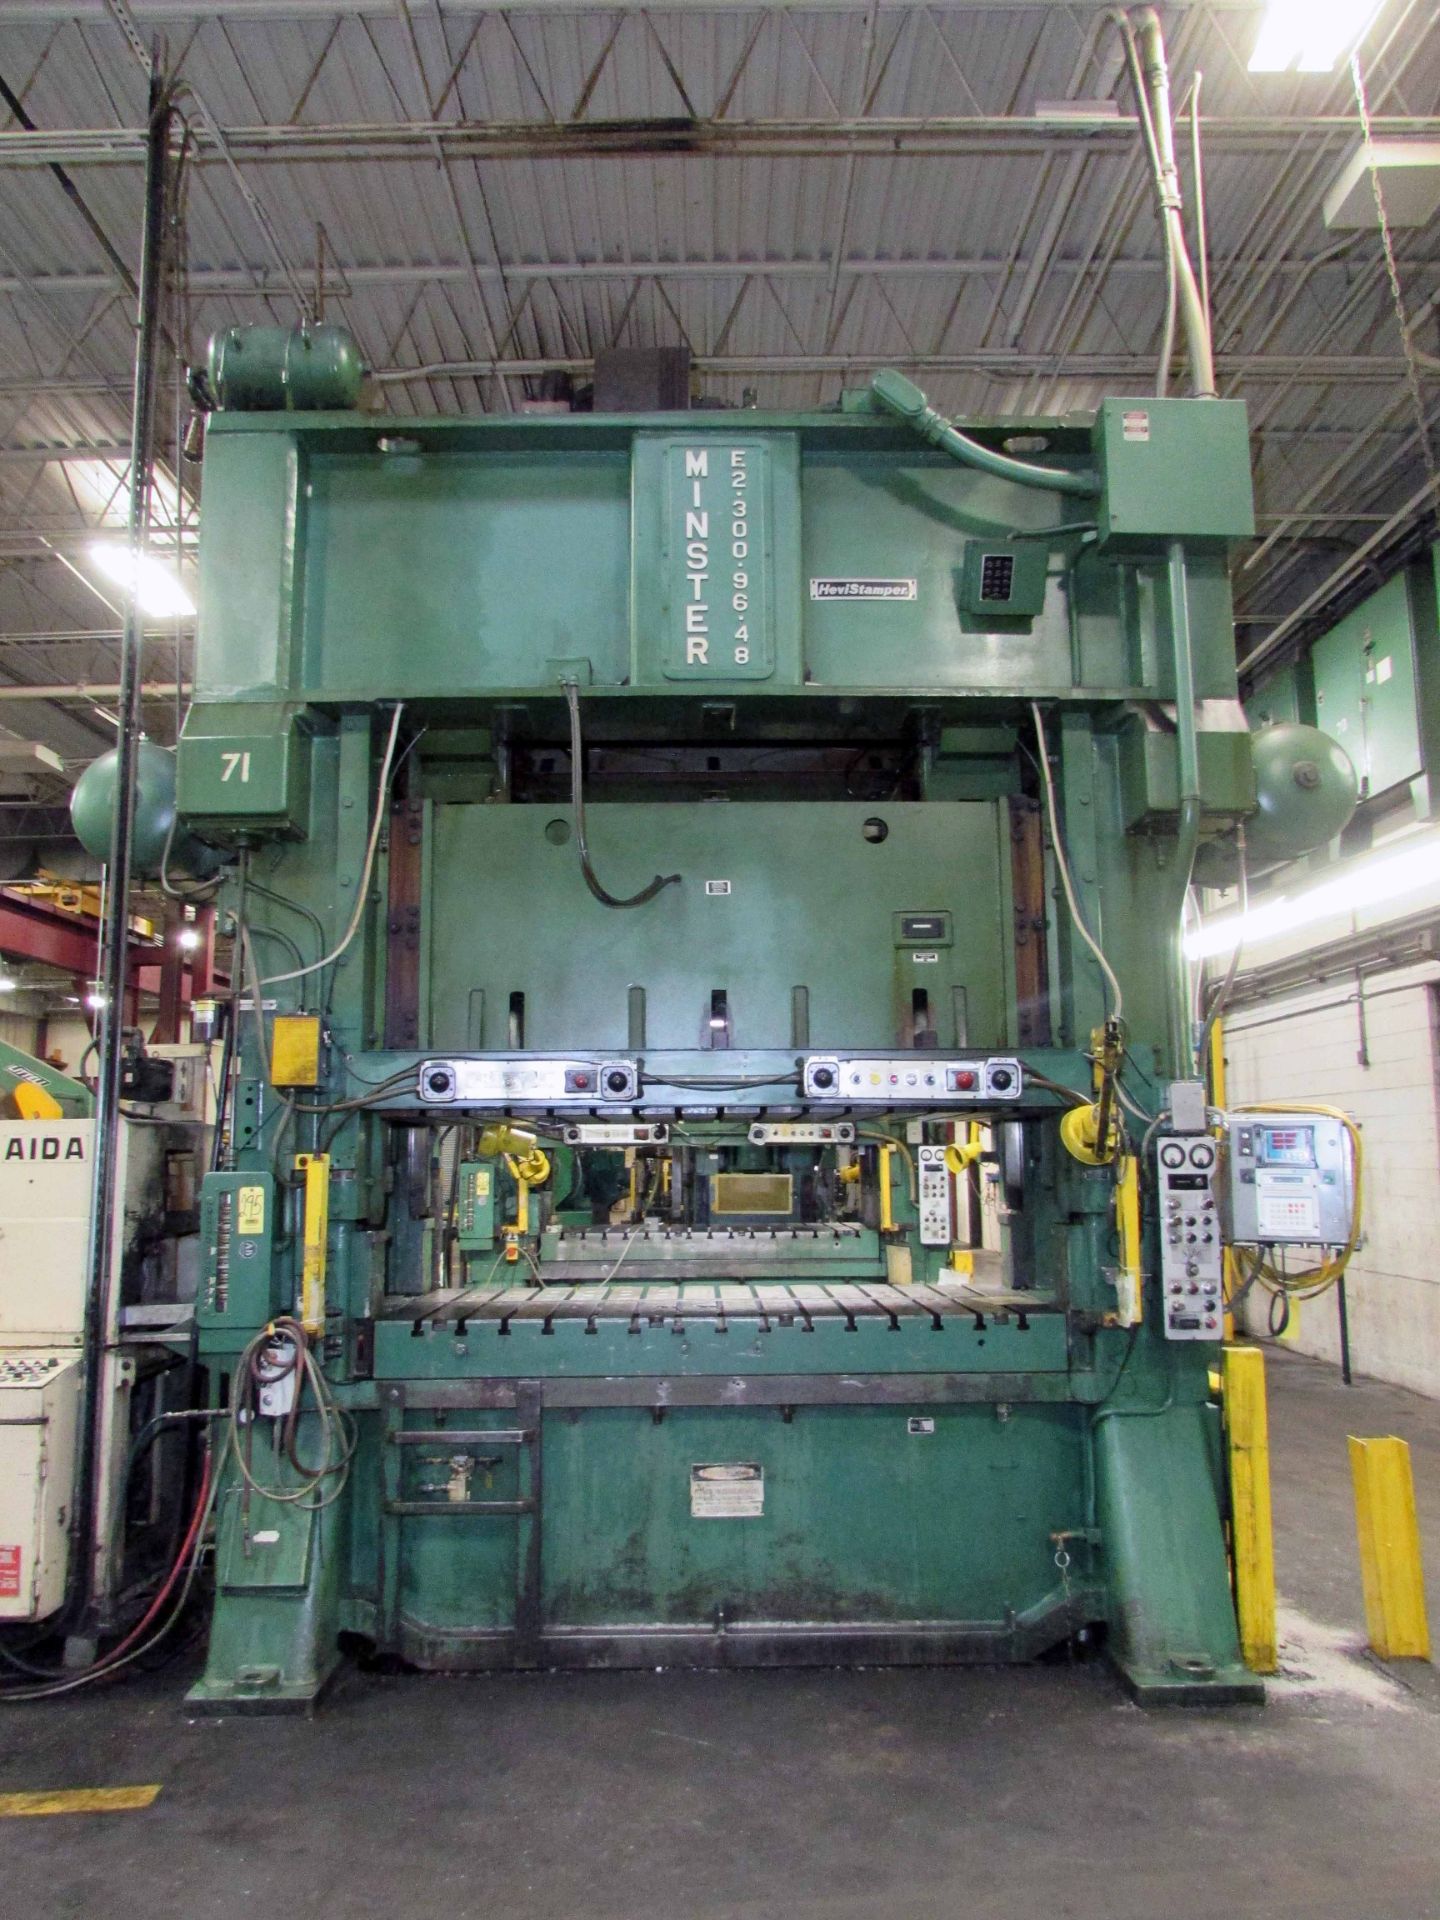 STRAIGHT SIDE 2-POINT ECCENTRIC GEARED PRESS, MINSTER 300 T. CAP. MDL. E2-300-96-48 “HEVI-STAMPER” - Image 2 of 23